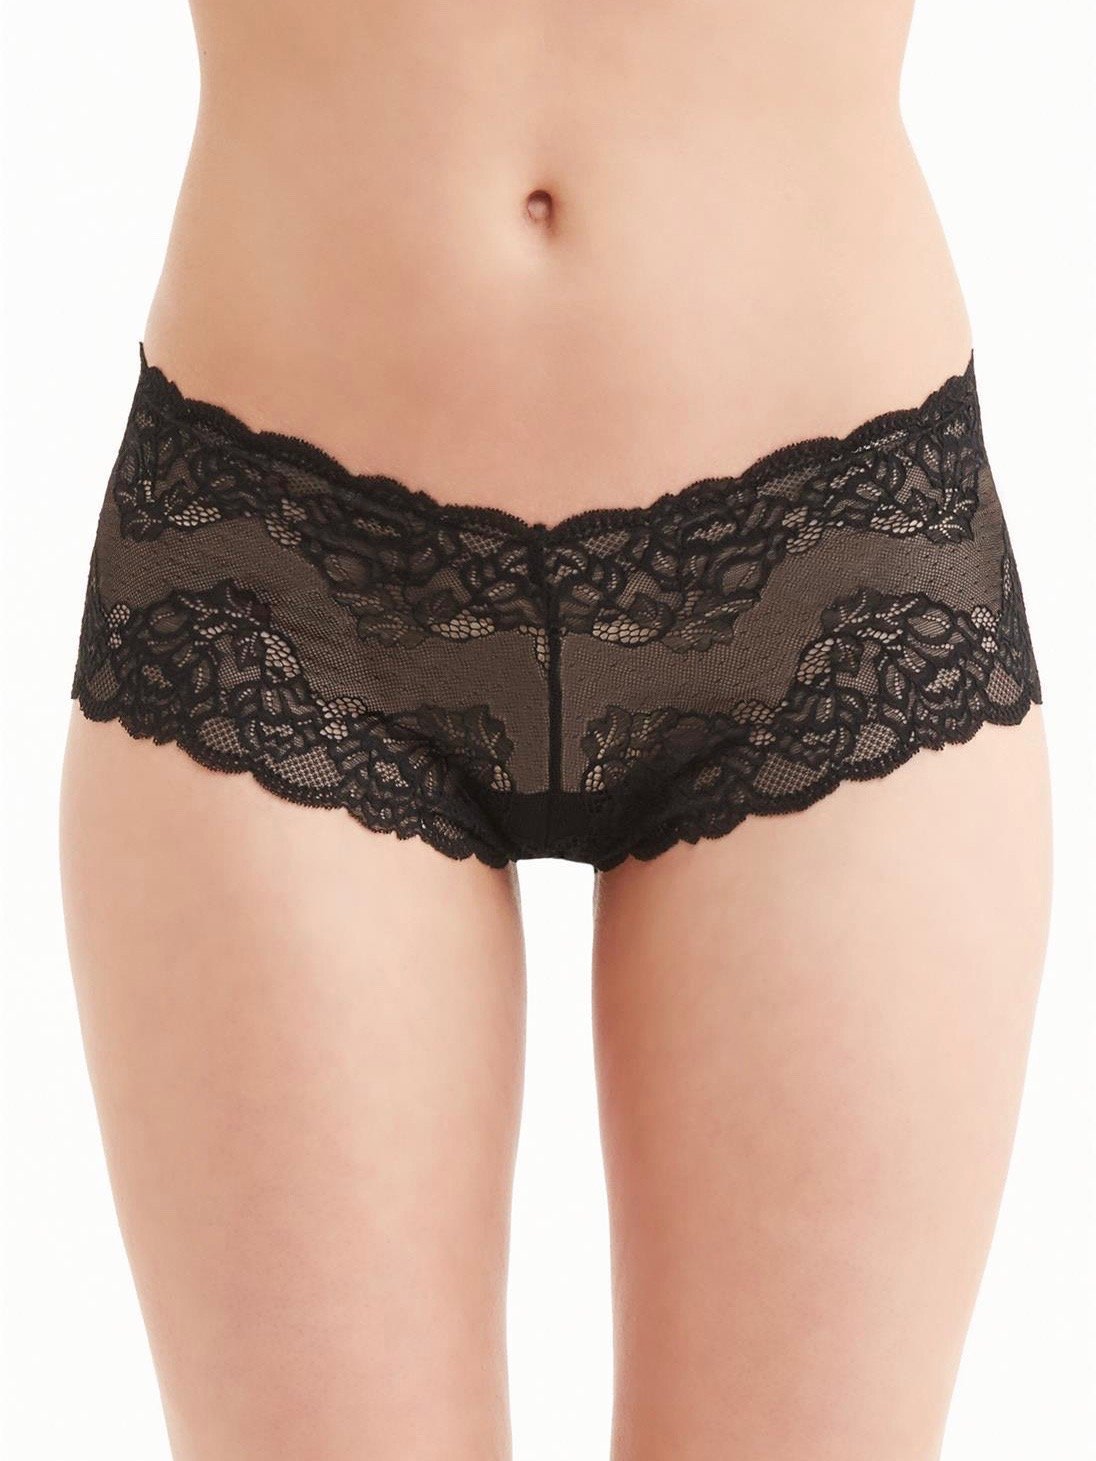 Montelle Intimates Panties S / Black Montelle Cheeky See Through Lace Sexy Panties